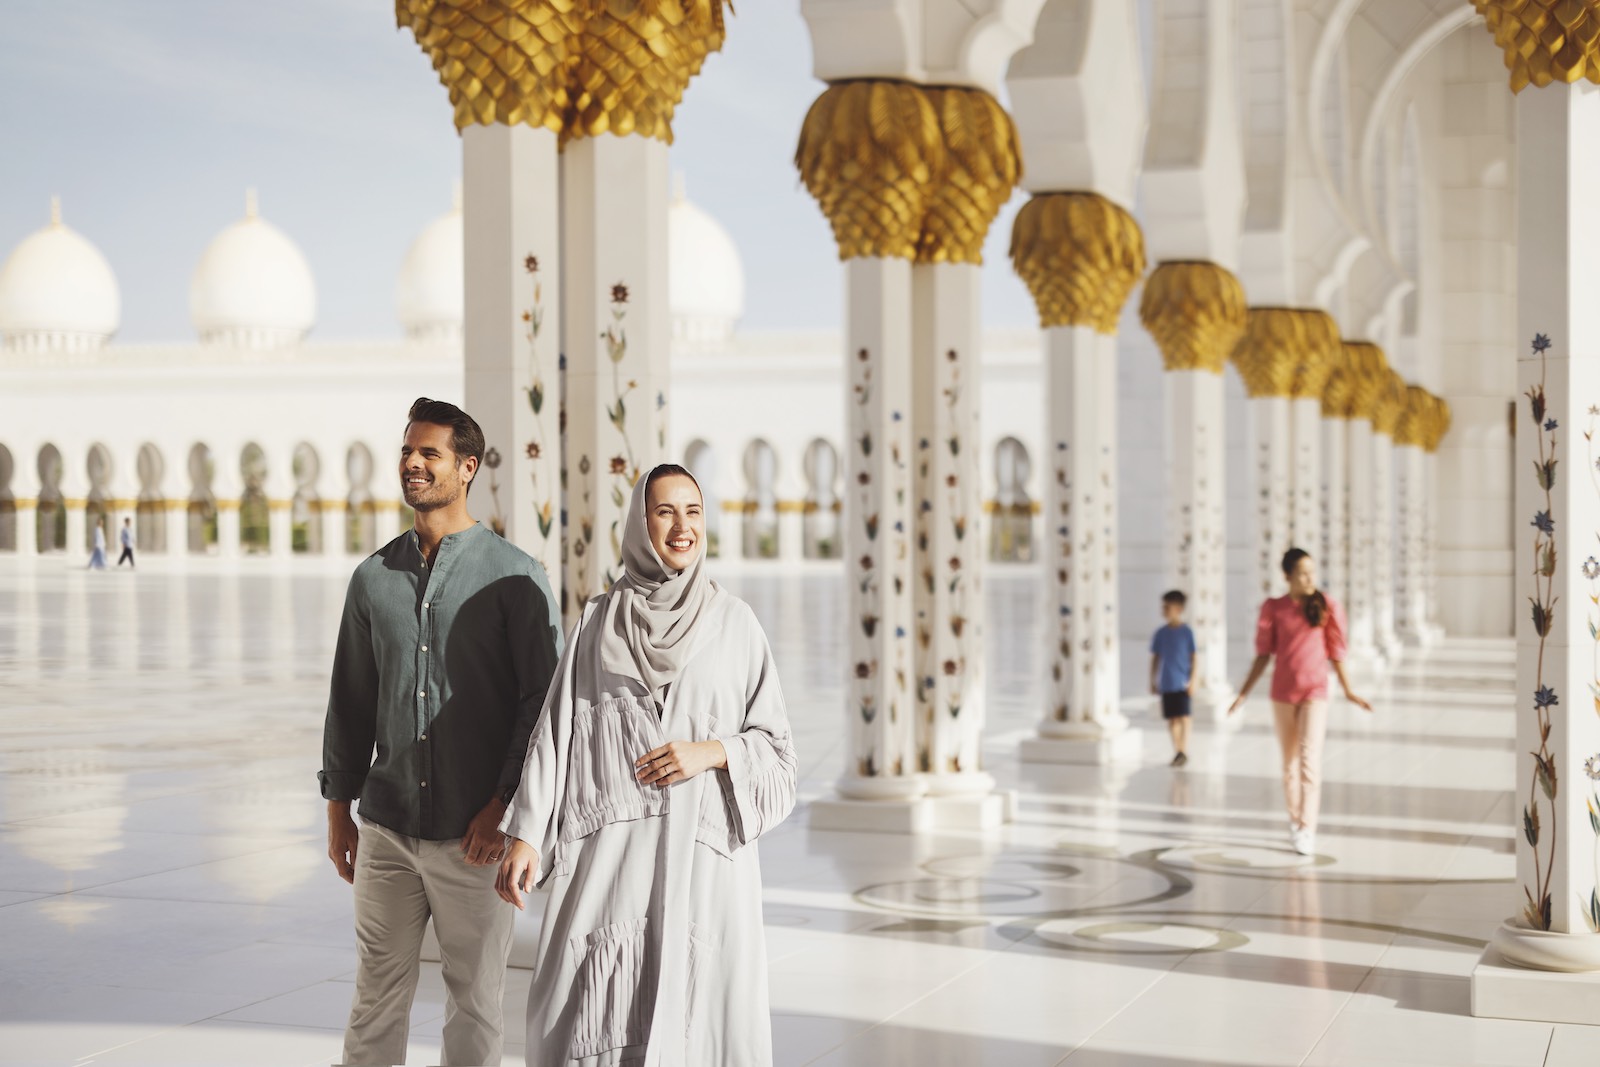 Exploring Sheikh Zayed Grand Mosque